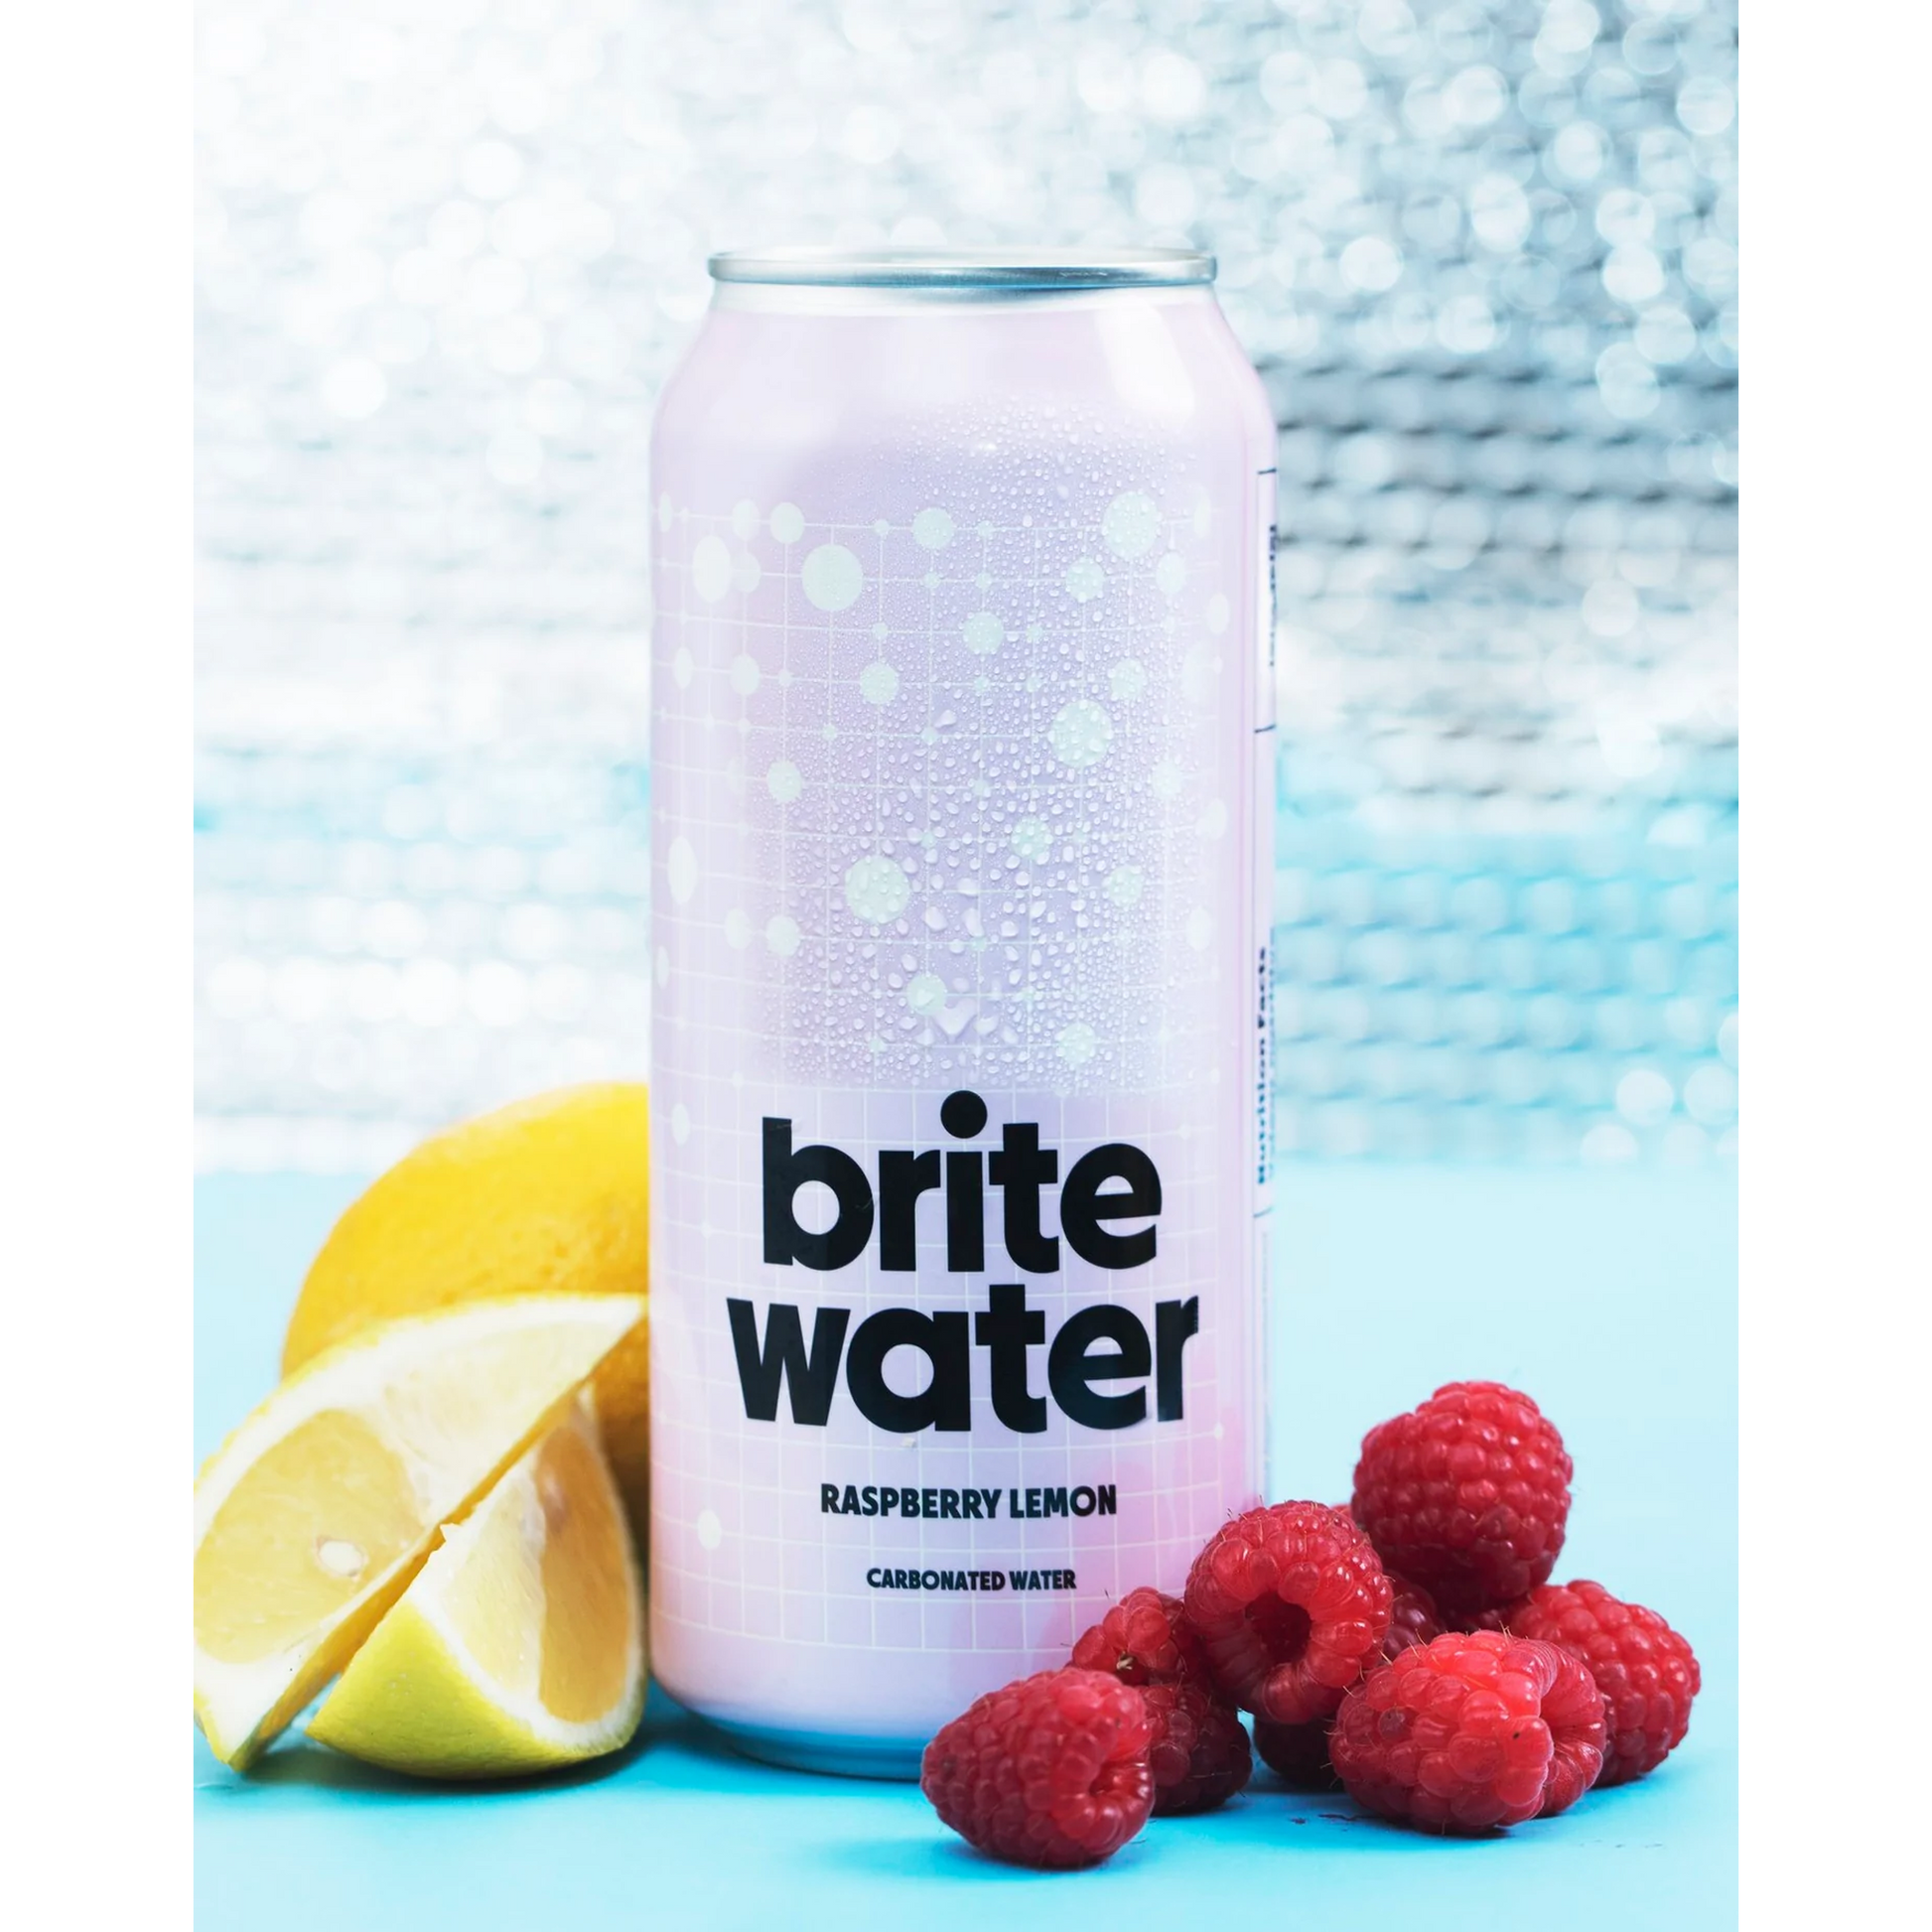 Raspberry Lemon brite water - elevated premium water - carbonated water Canada - drink local water - reduce your carbon footprint